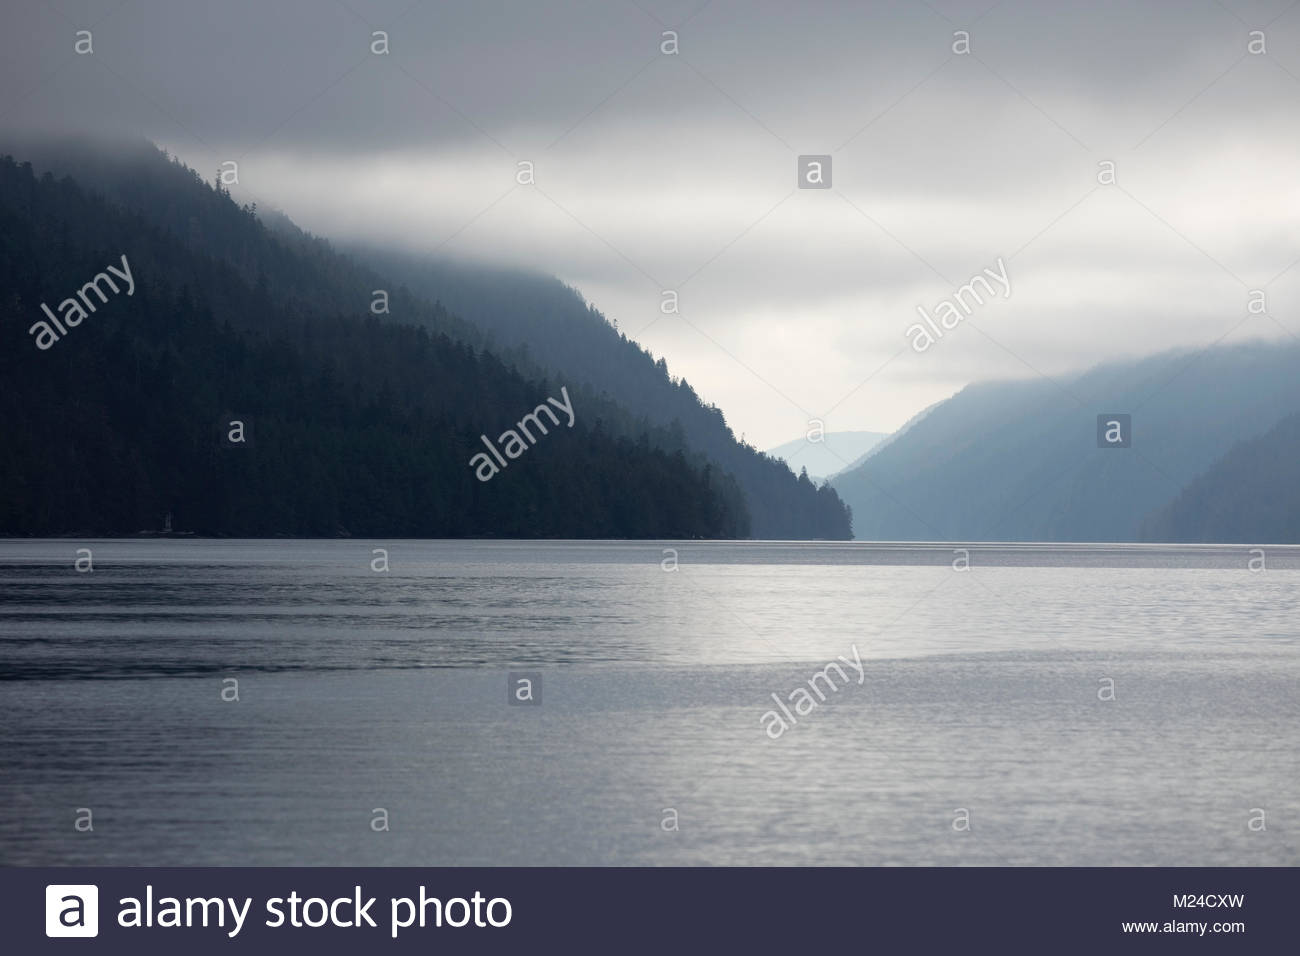 Tranquil silhouetted mountains and lake under cloudy sky Stock Photo